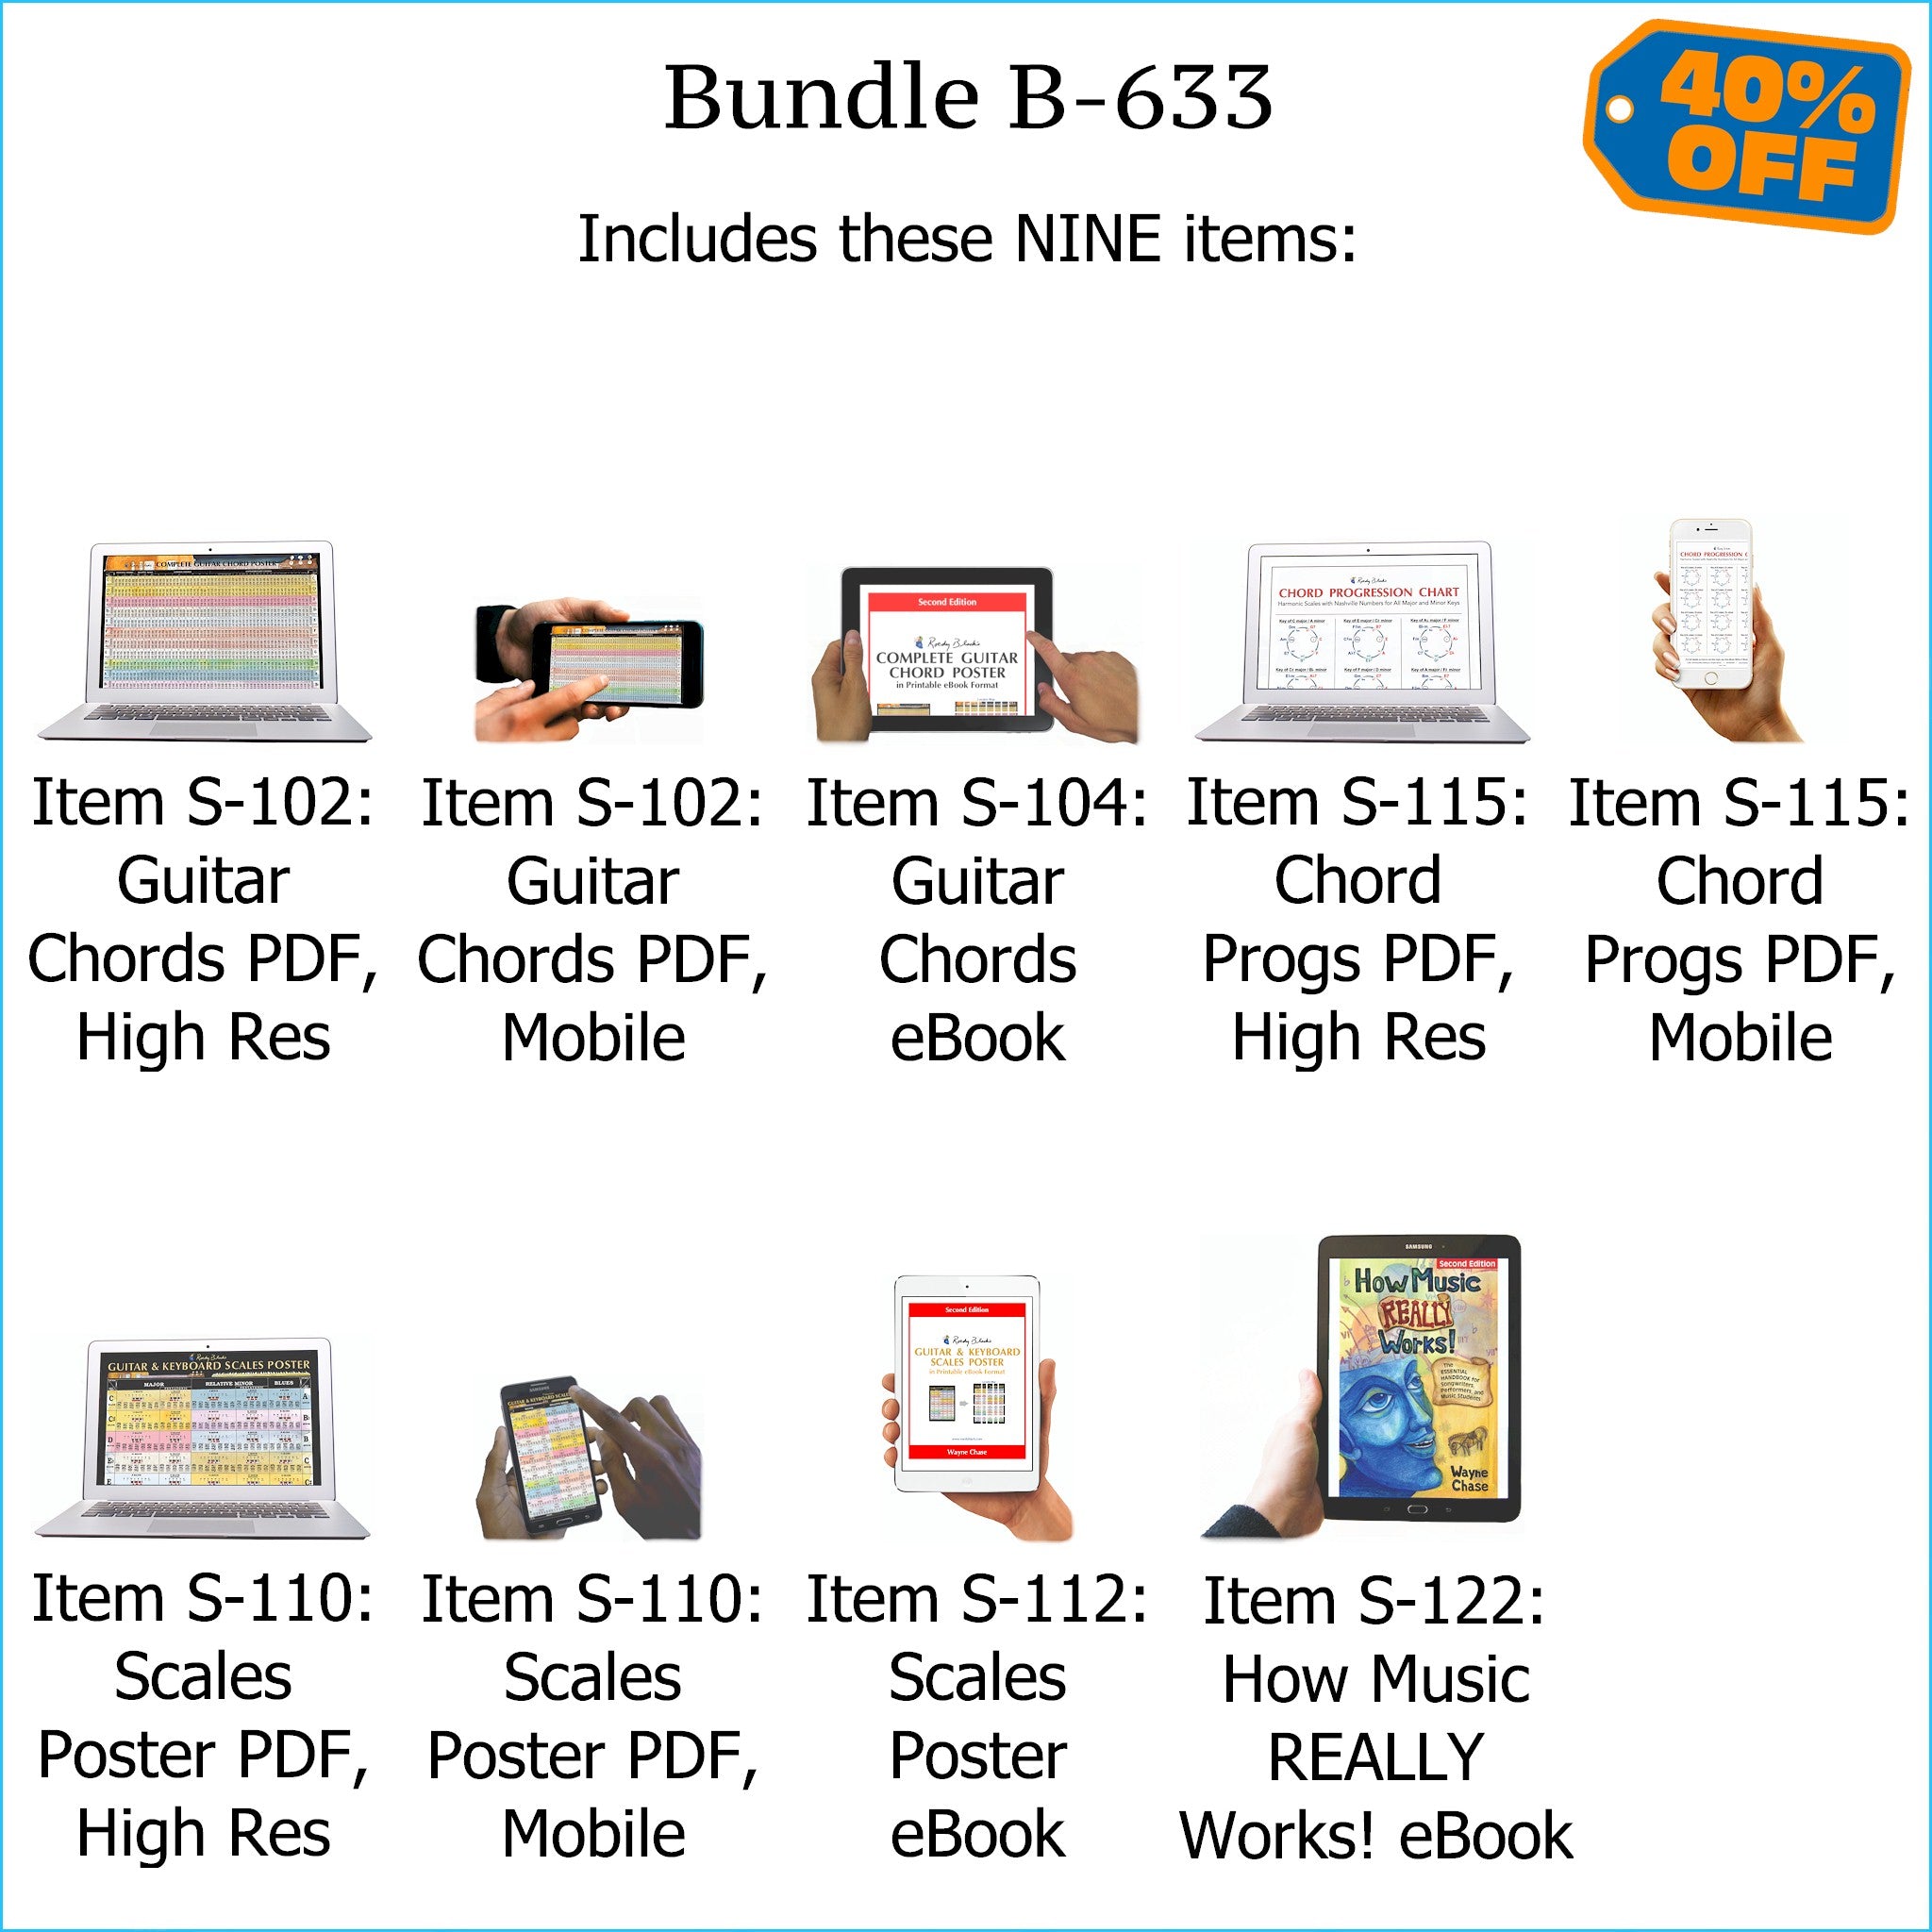 Bundle B-633: How Music REALLY Works! E-Book + Guitar Chords, Chord Progressions, Scales - E-Posters and Printable E-Books. FREE Download Protection.